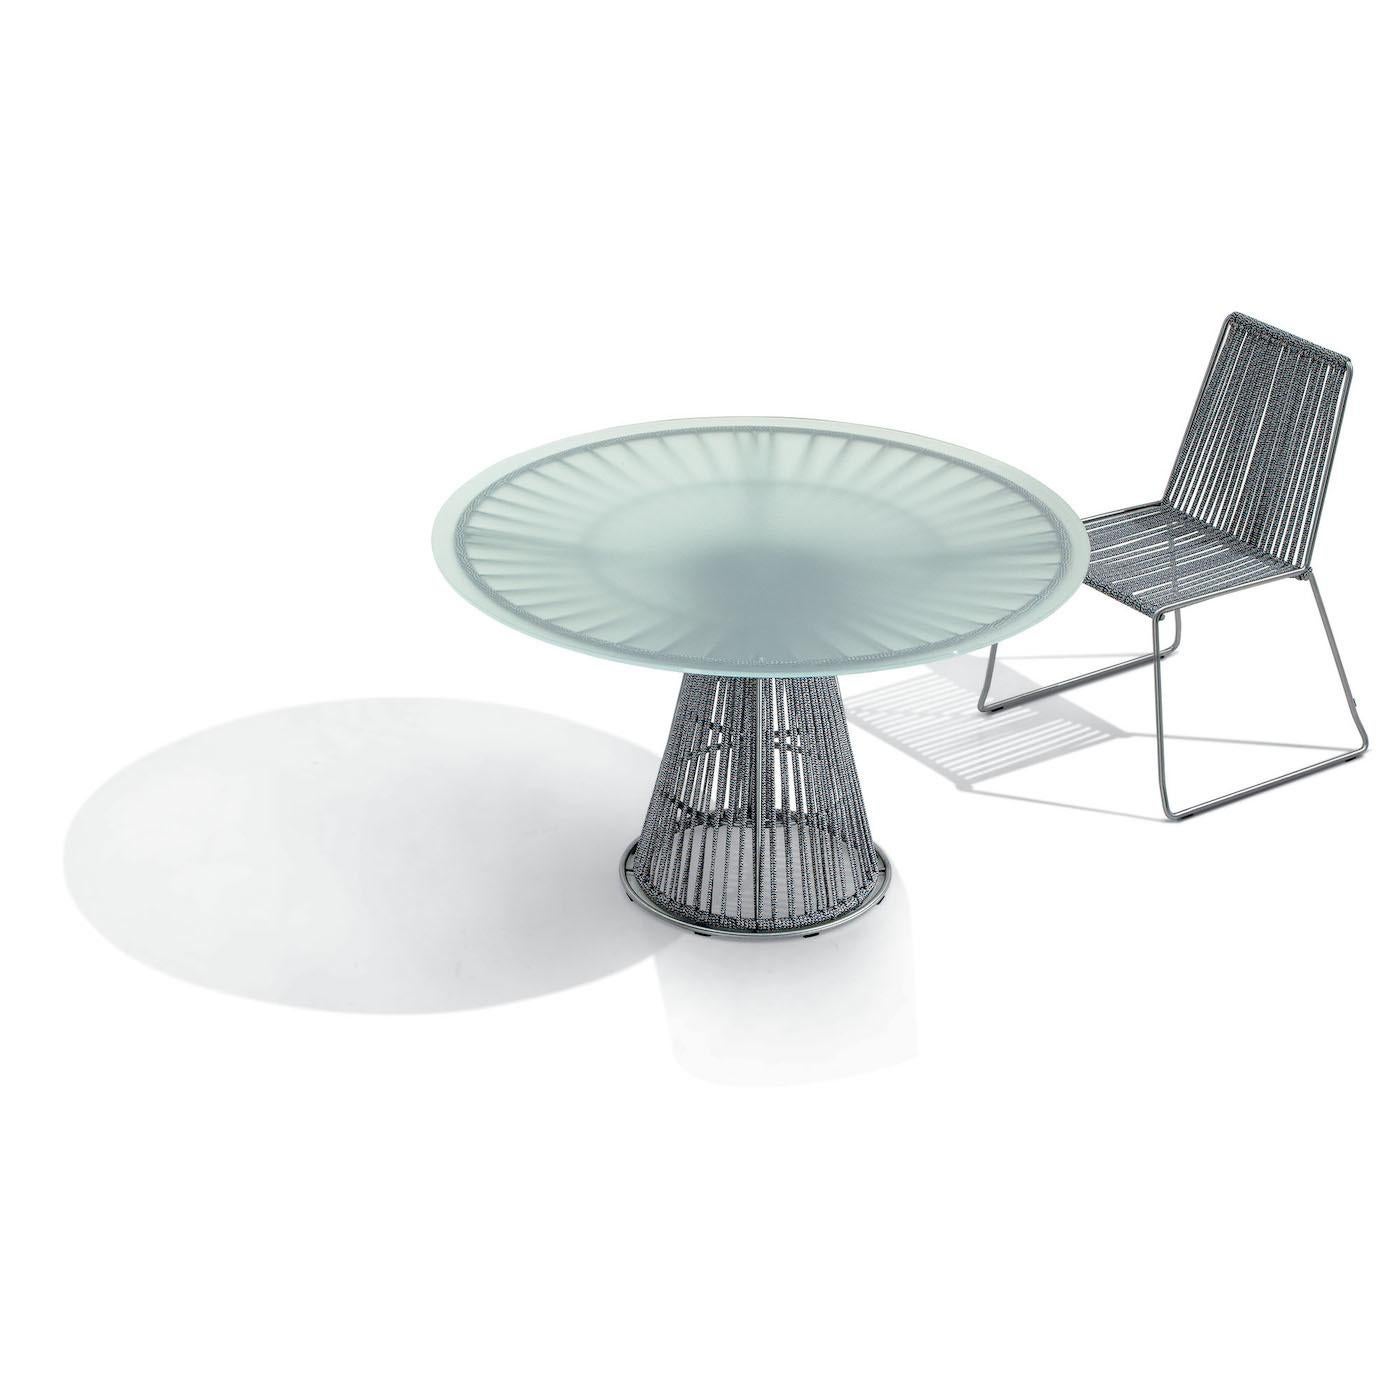 Crafted entirely of stainless steel rods with brushed finish, this stunning dining table makes a dynamic style statement in a modern and Industrial-inspired dining room. The cone-shaped column and the base under the tabletop are composed of strings